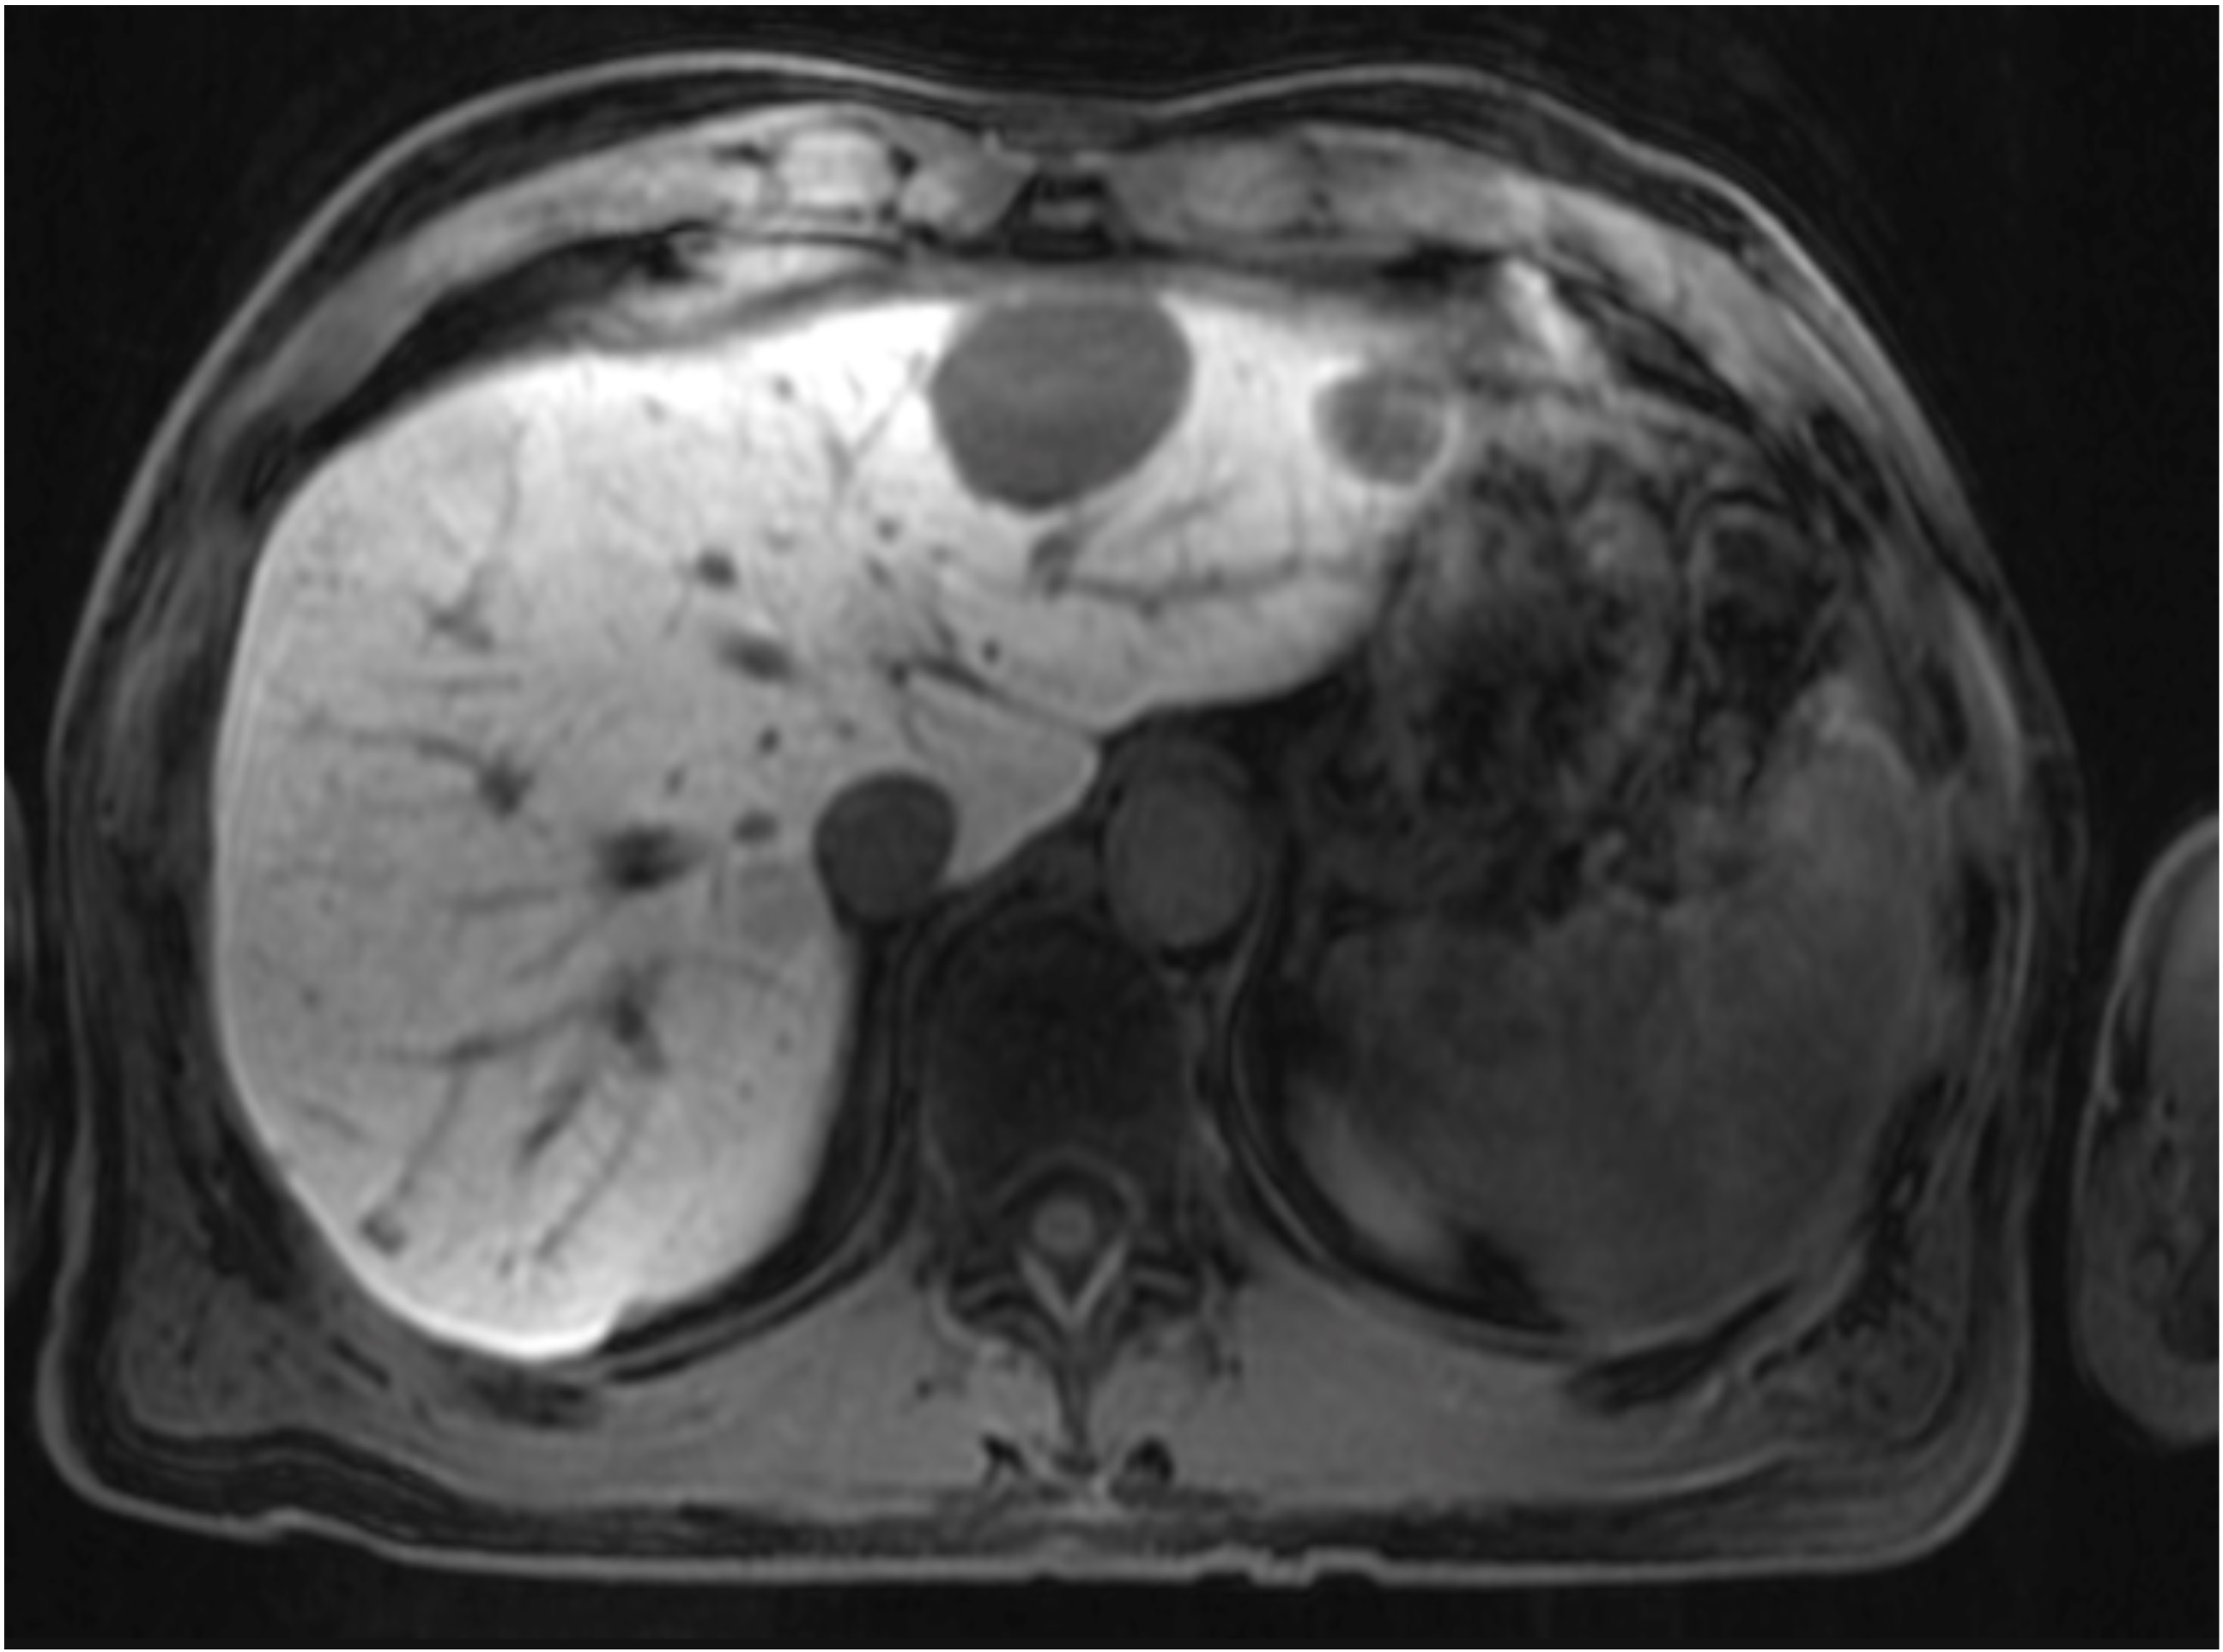 Diagnostic Radiology MRI PACS Image of the liver with hepatobiliary-specific contrast agent to allow for accurate evaluation of metastatic liver lesions.